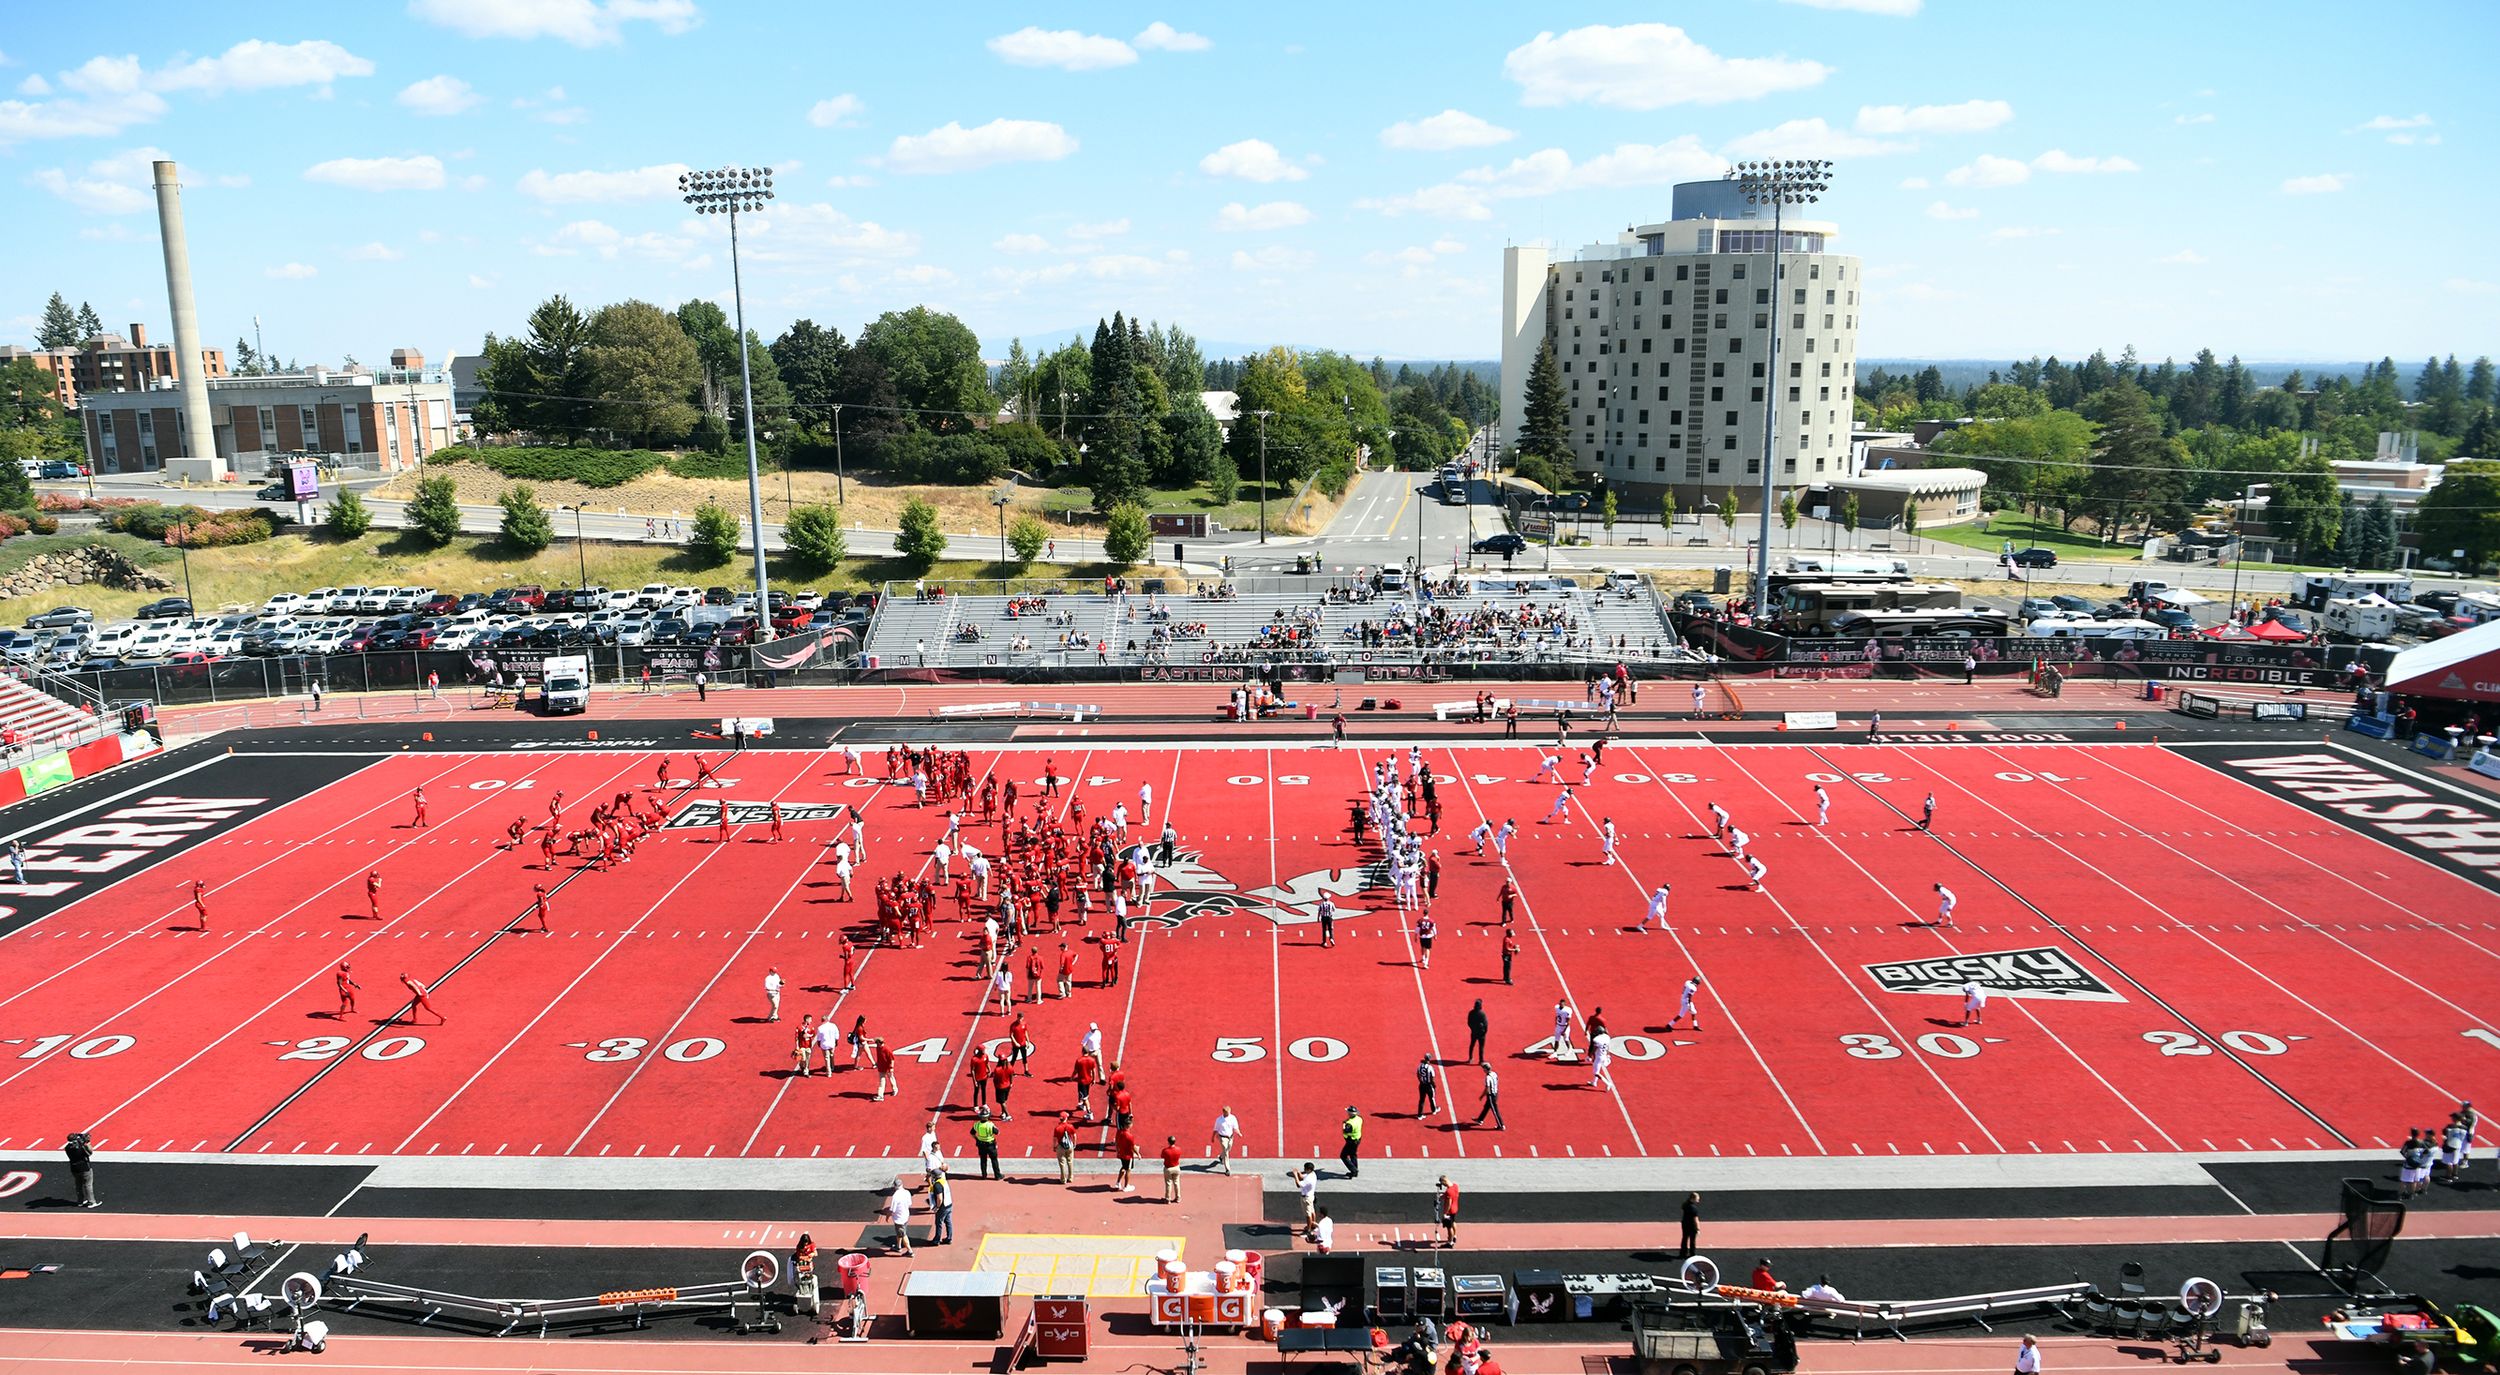 Michael Roos looks back at 10 years of Eastern Washington's red turf